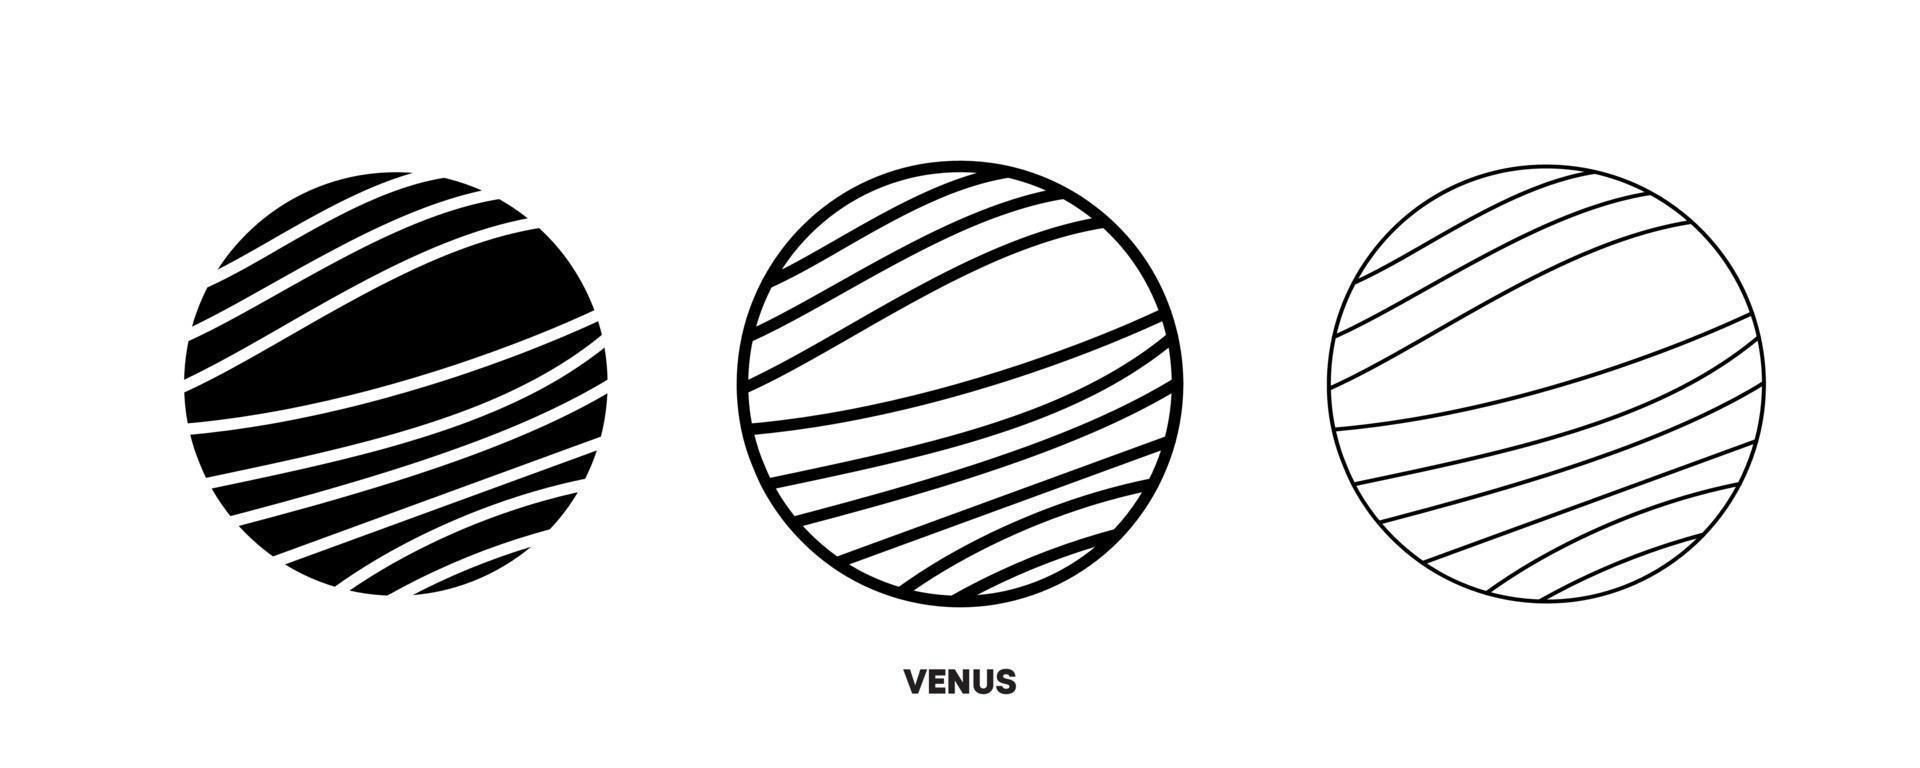 Venus planet icon vector. Simple planet Venus sign in modern design style and logo art for website and mobile app. Editable drawing and silhouette in one. vector